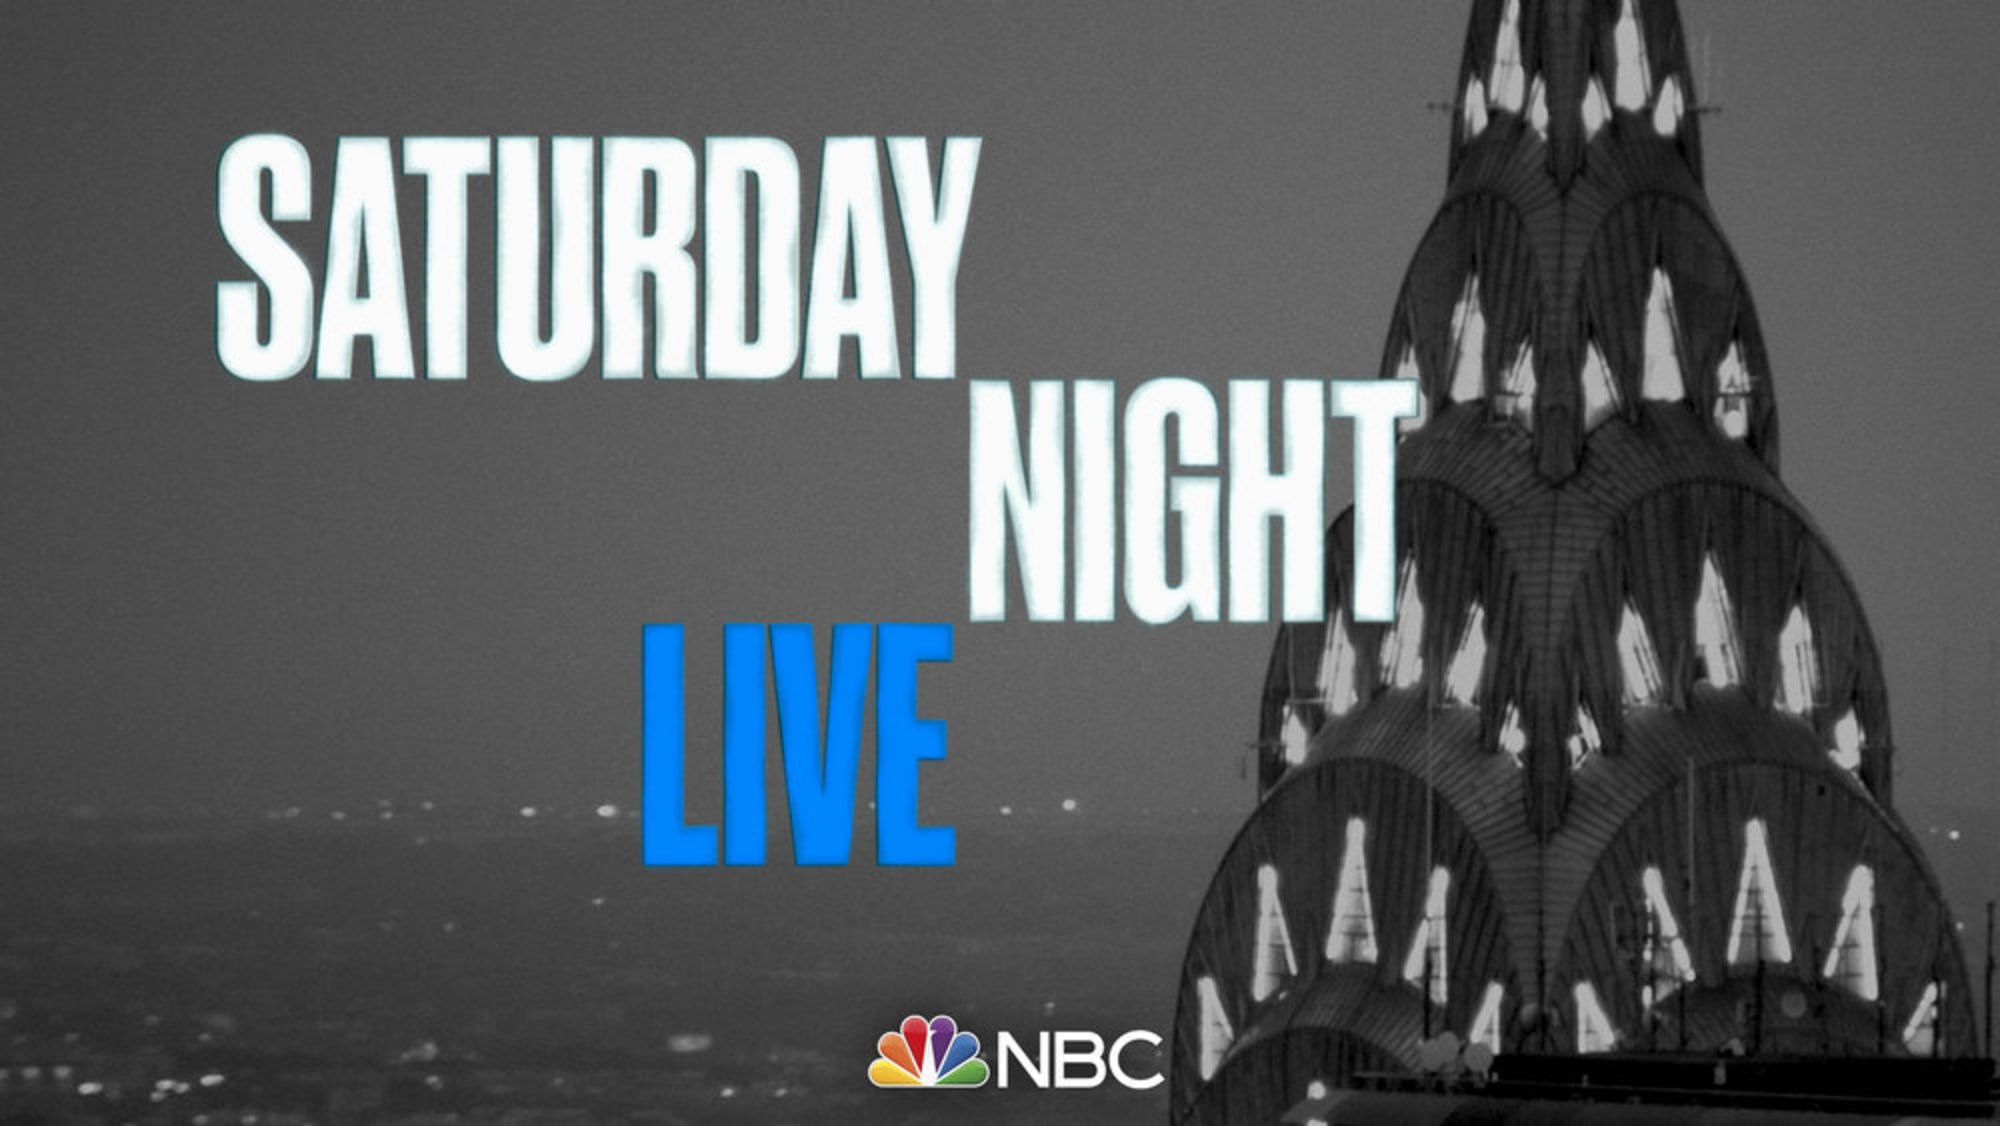 When does Saturday Night Live return with new episodes in 2023?